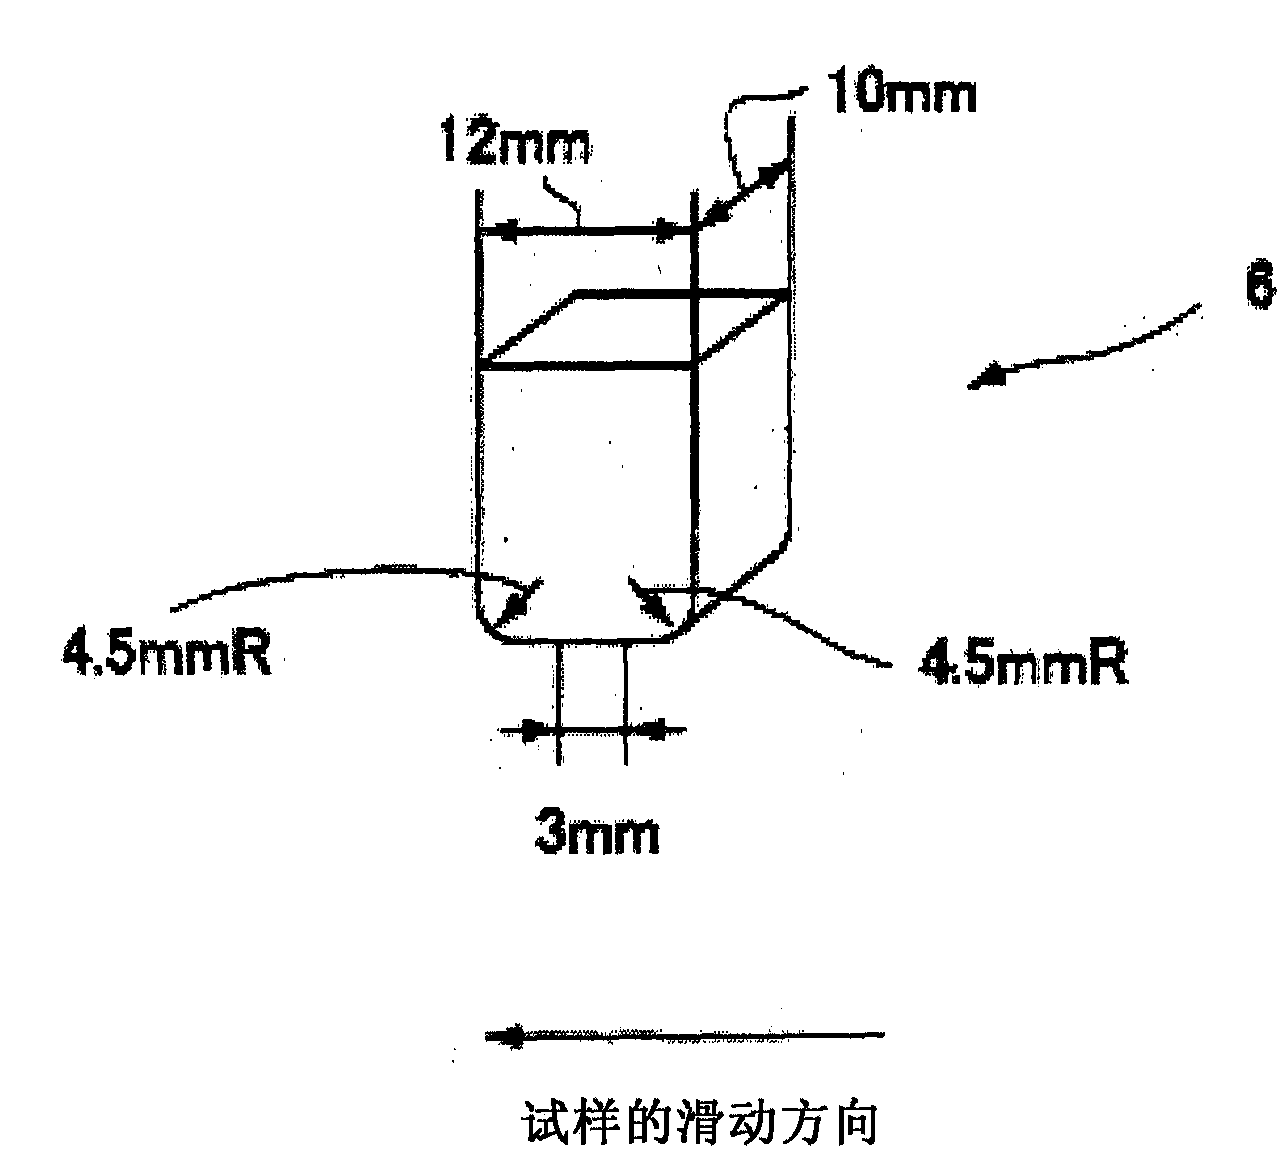 Method for producing alloyed hot-dip galvanized steel sheet having excellent adhesion to plating and excellent sliding properties